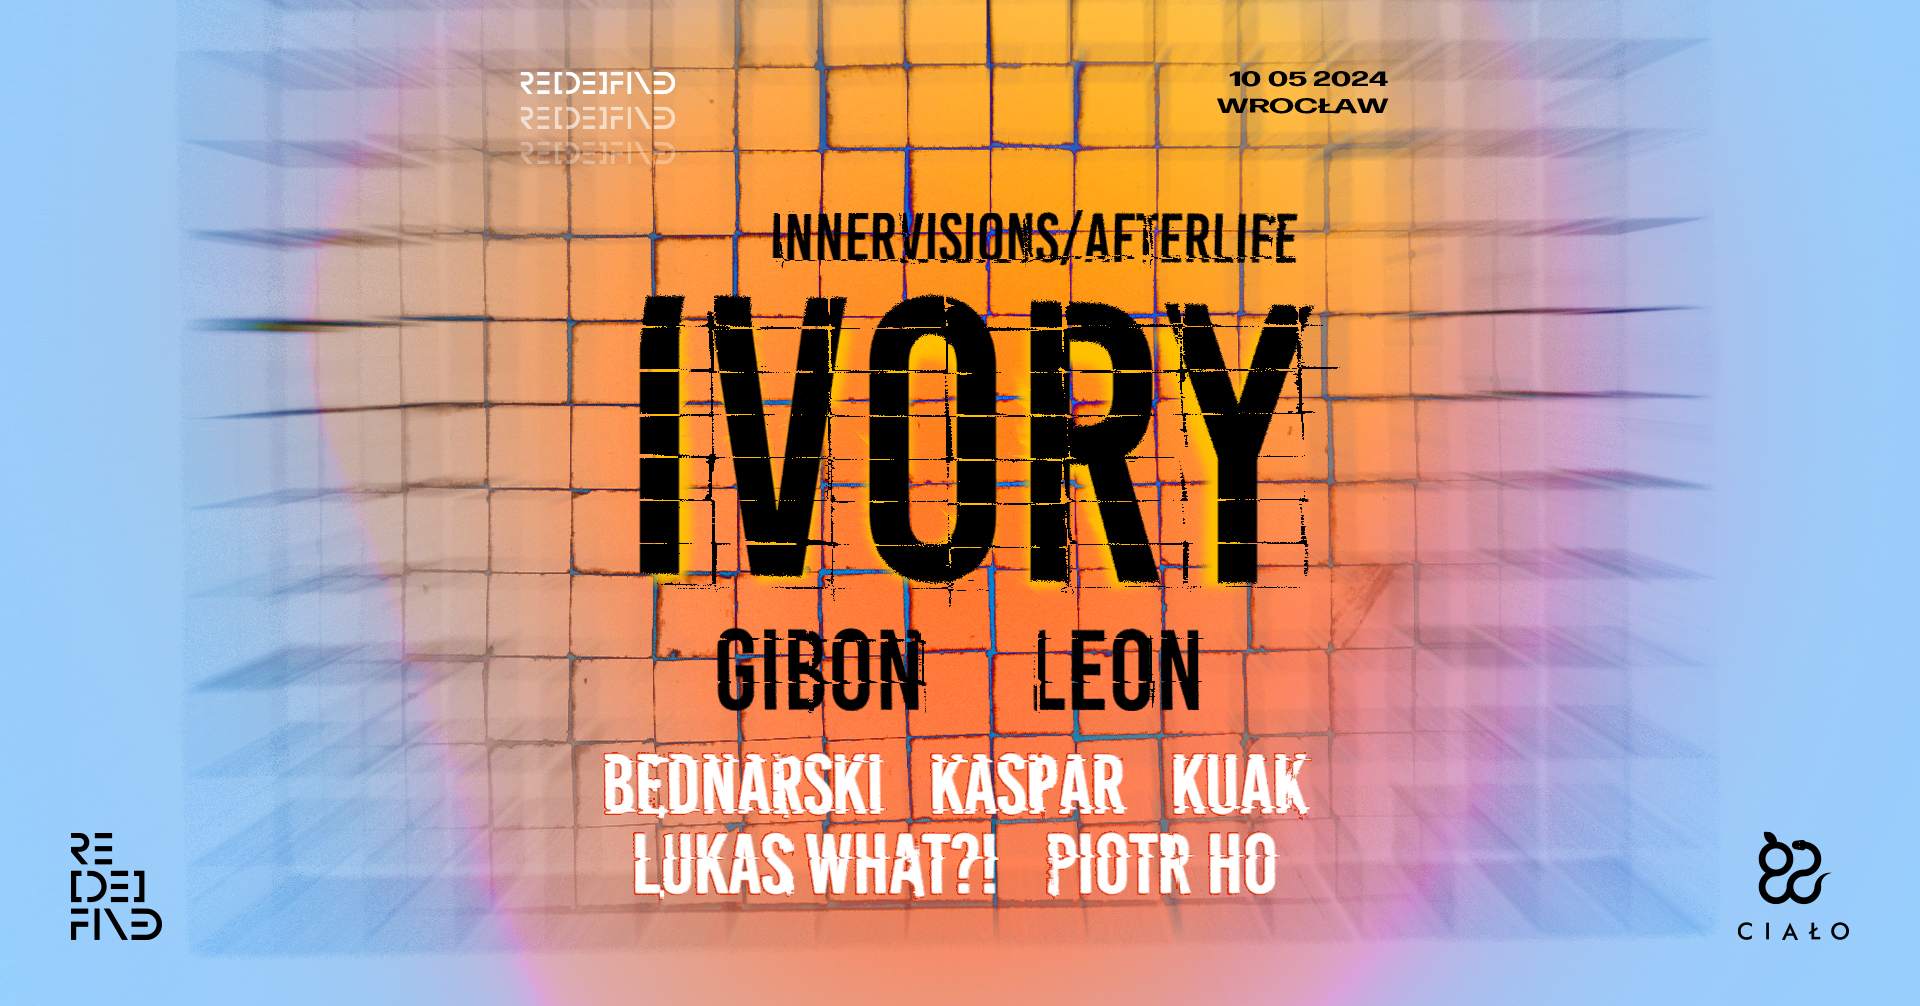 redefined: Ivory (Innervisions / Afterlife) - Ciało - フライヤー表